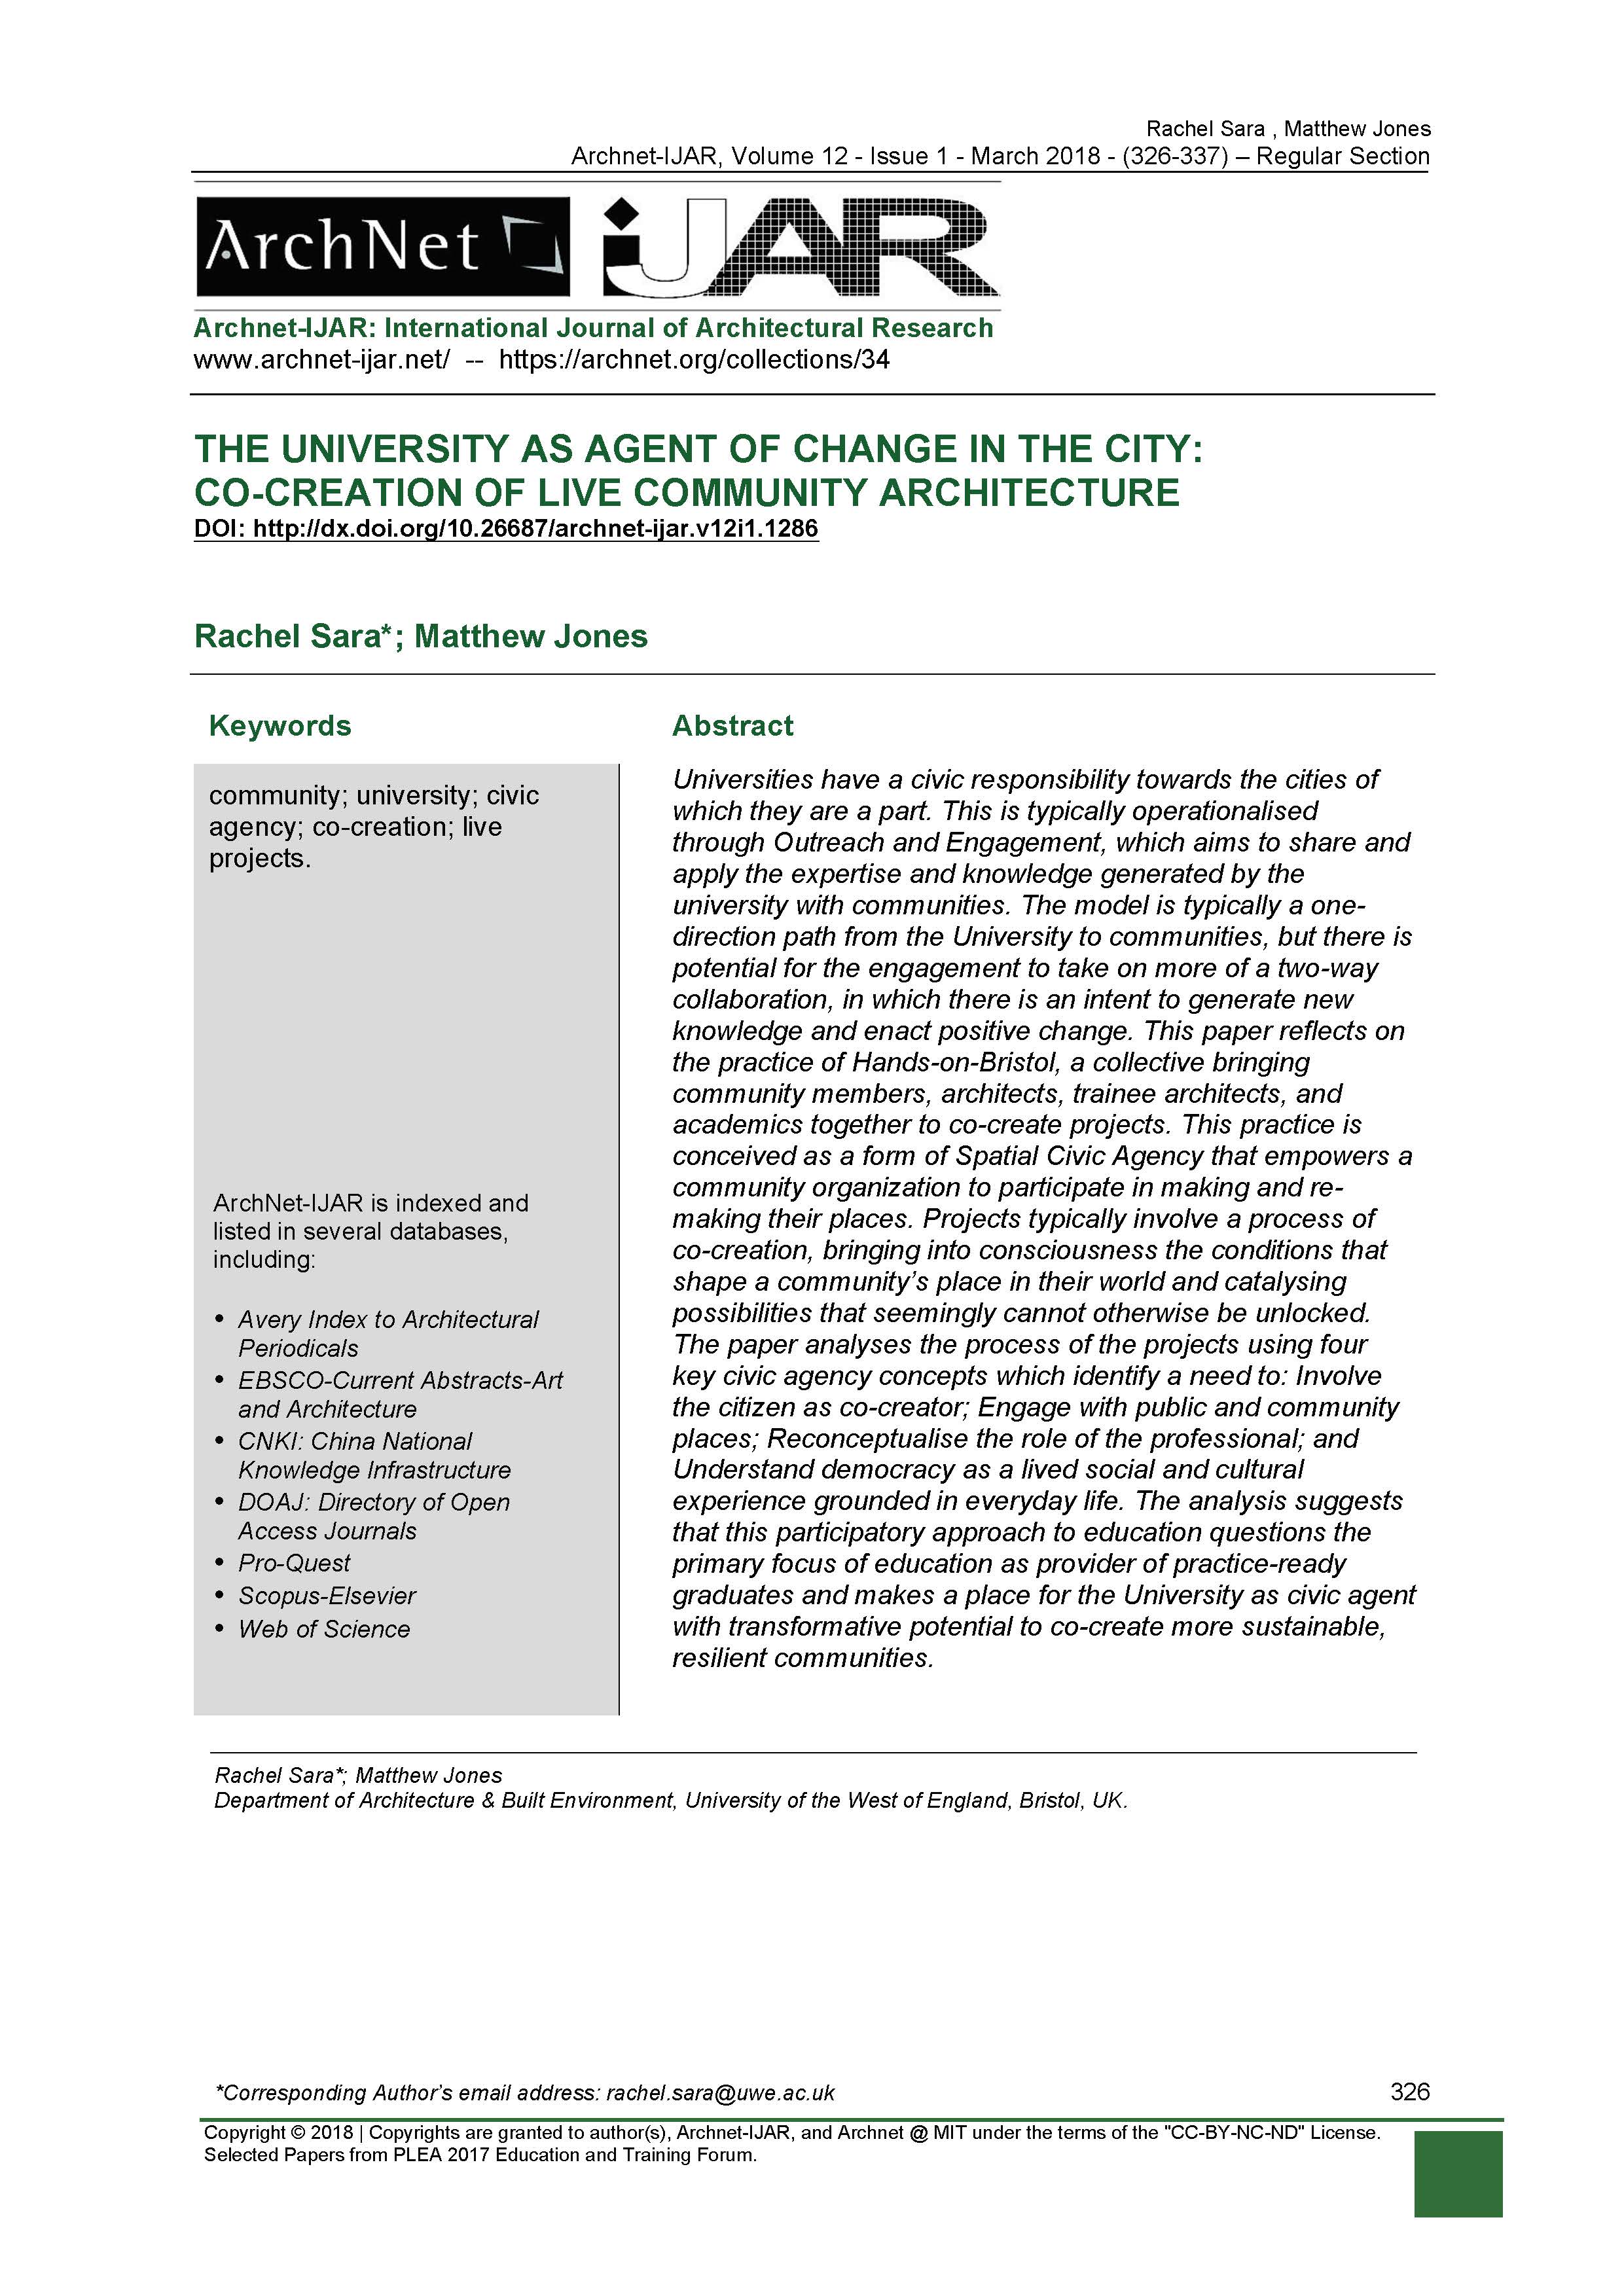 The University as Agent of Change in the City: Co-Creation of Live Community Architecture